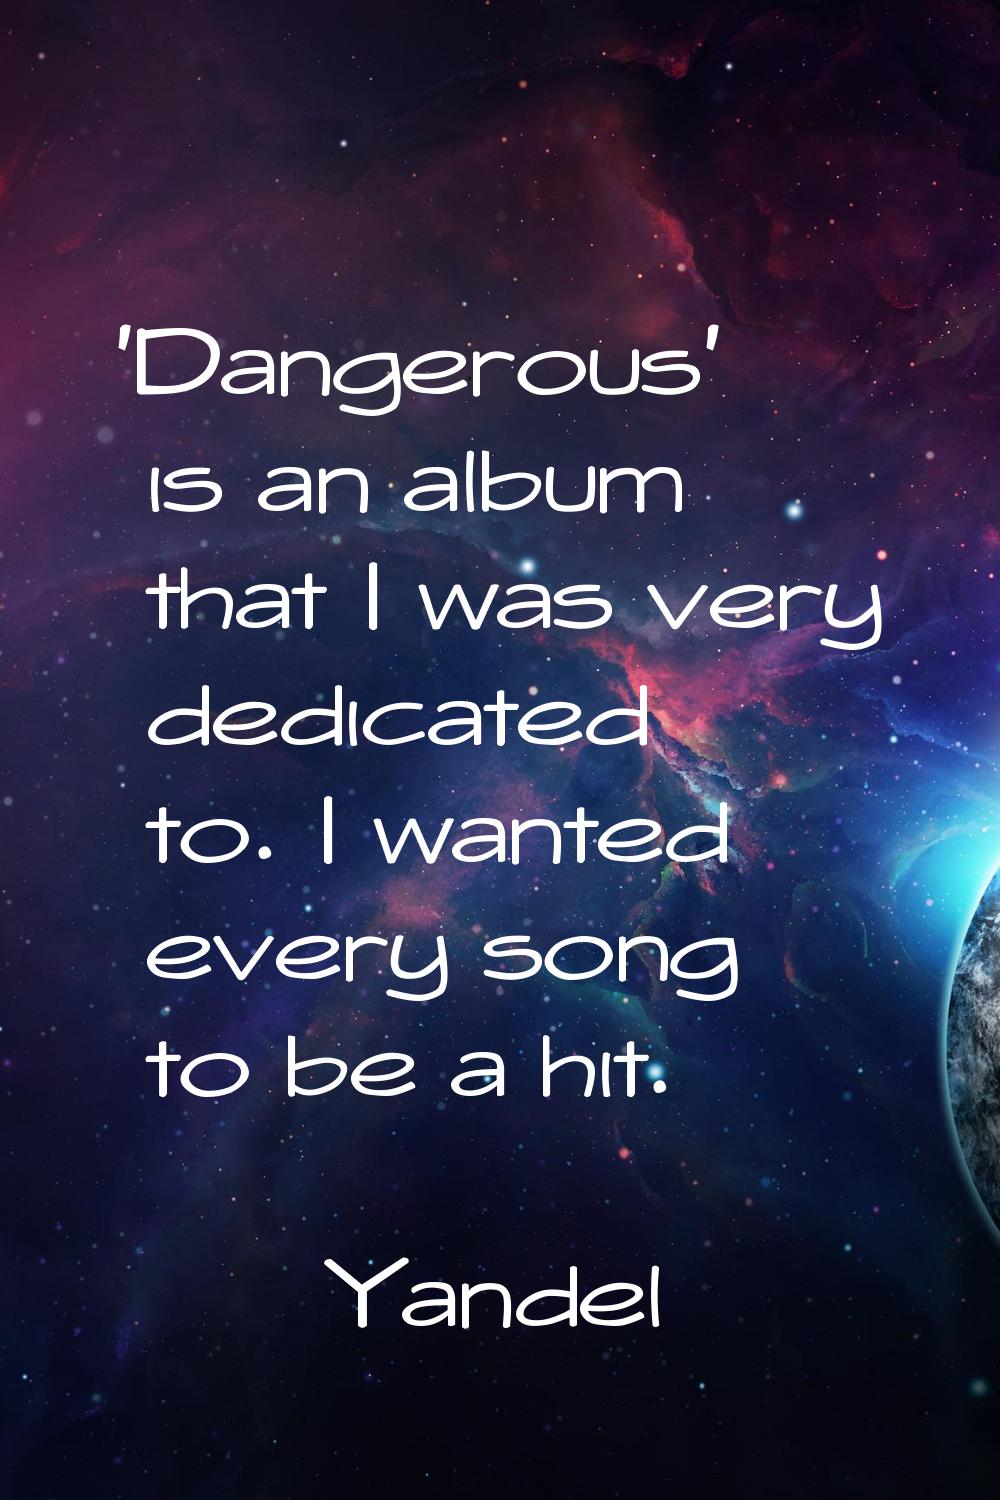 'Dangerous' is an album that I was very dedicated to. I wanted every song to be a hit.